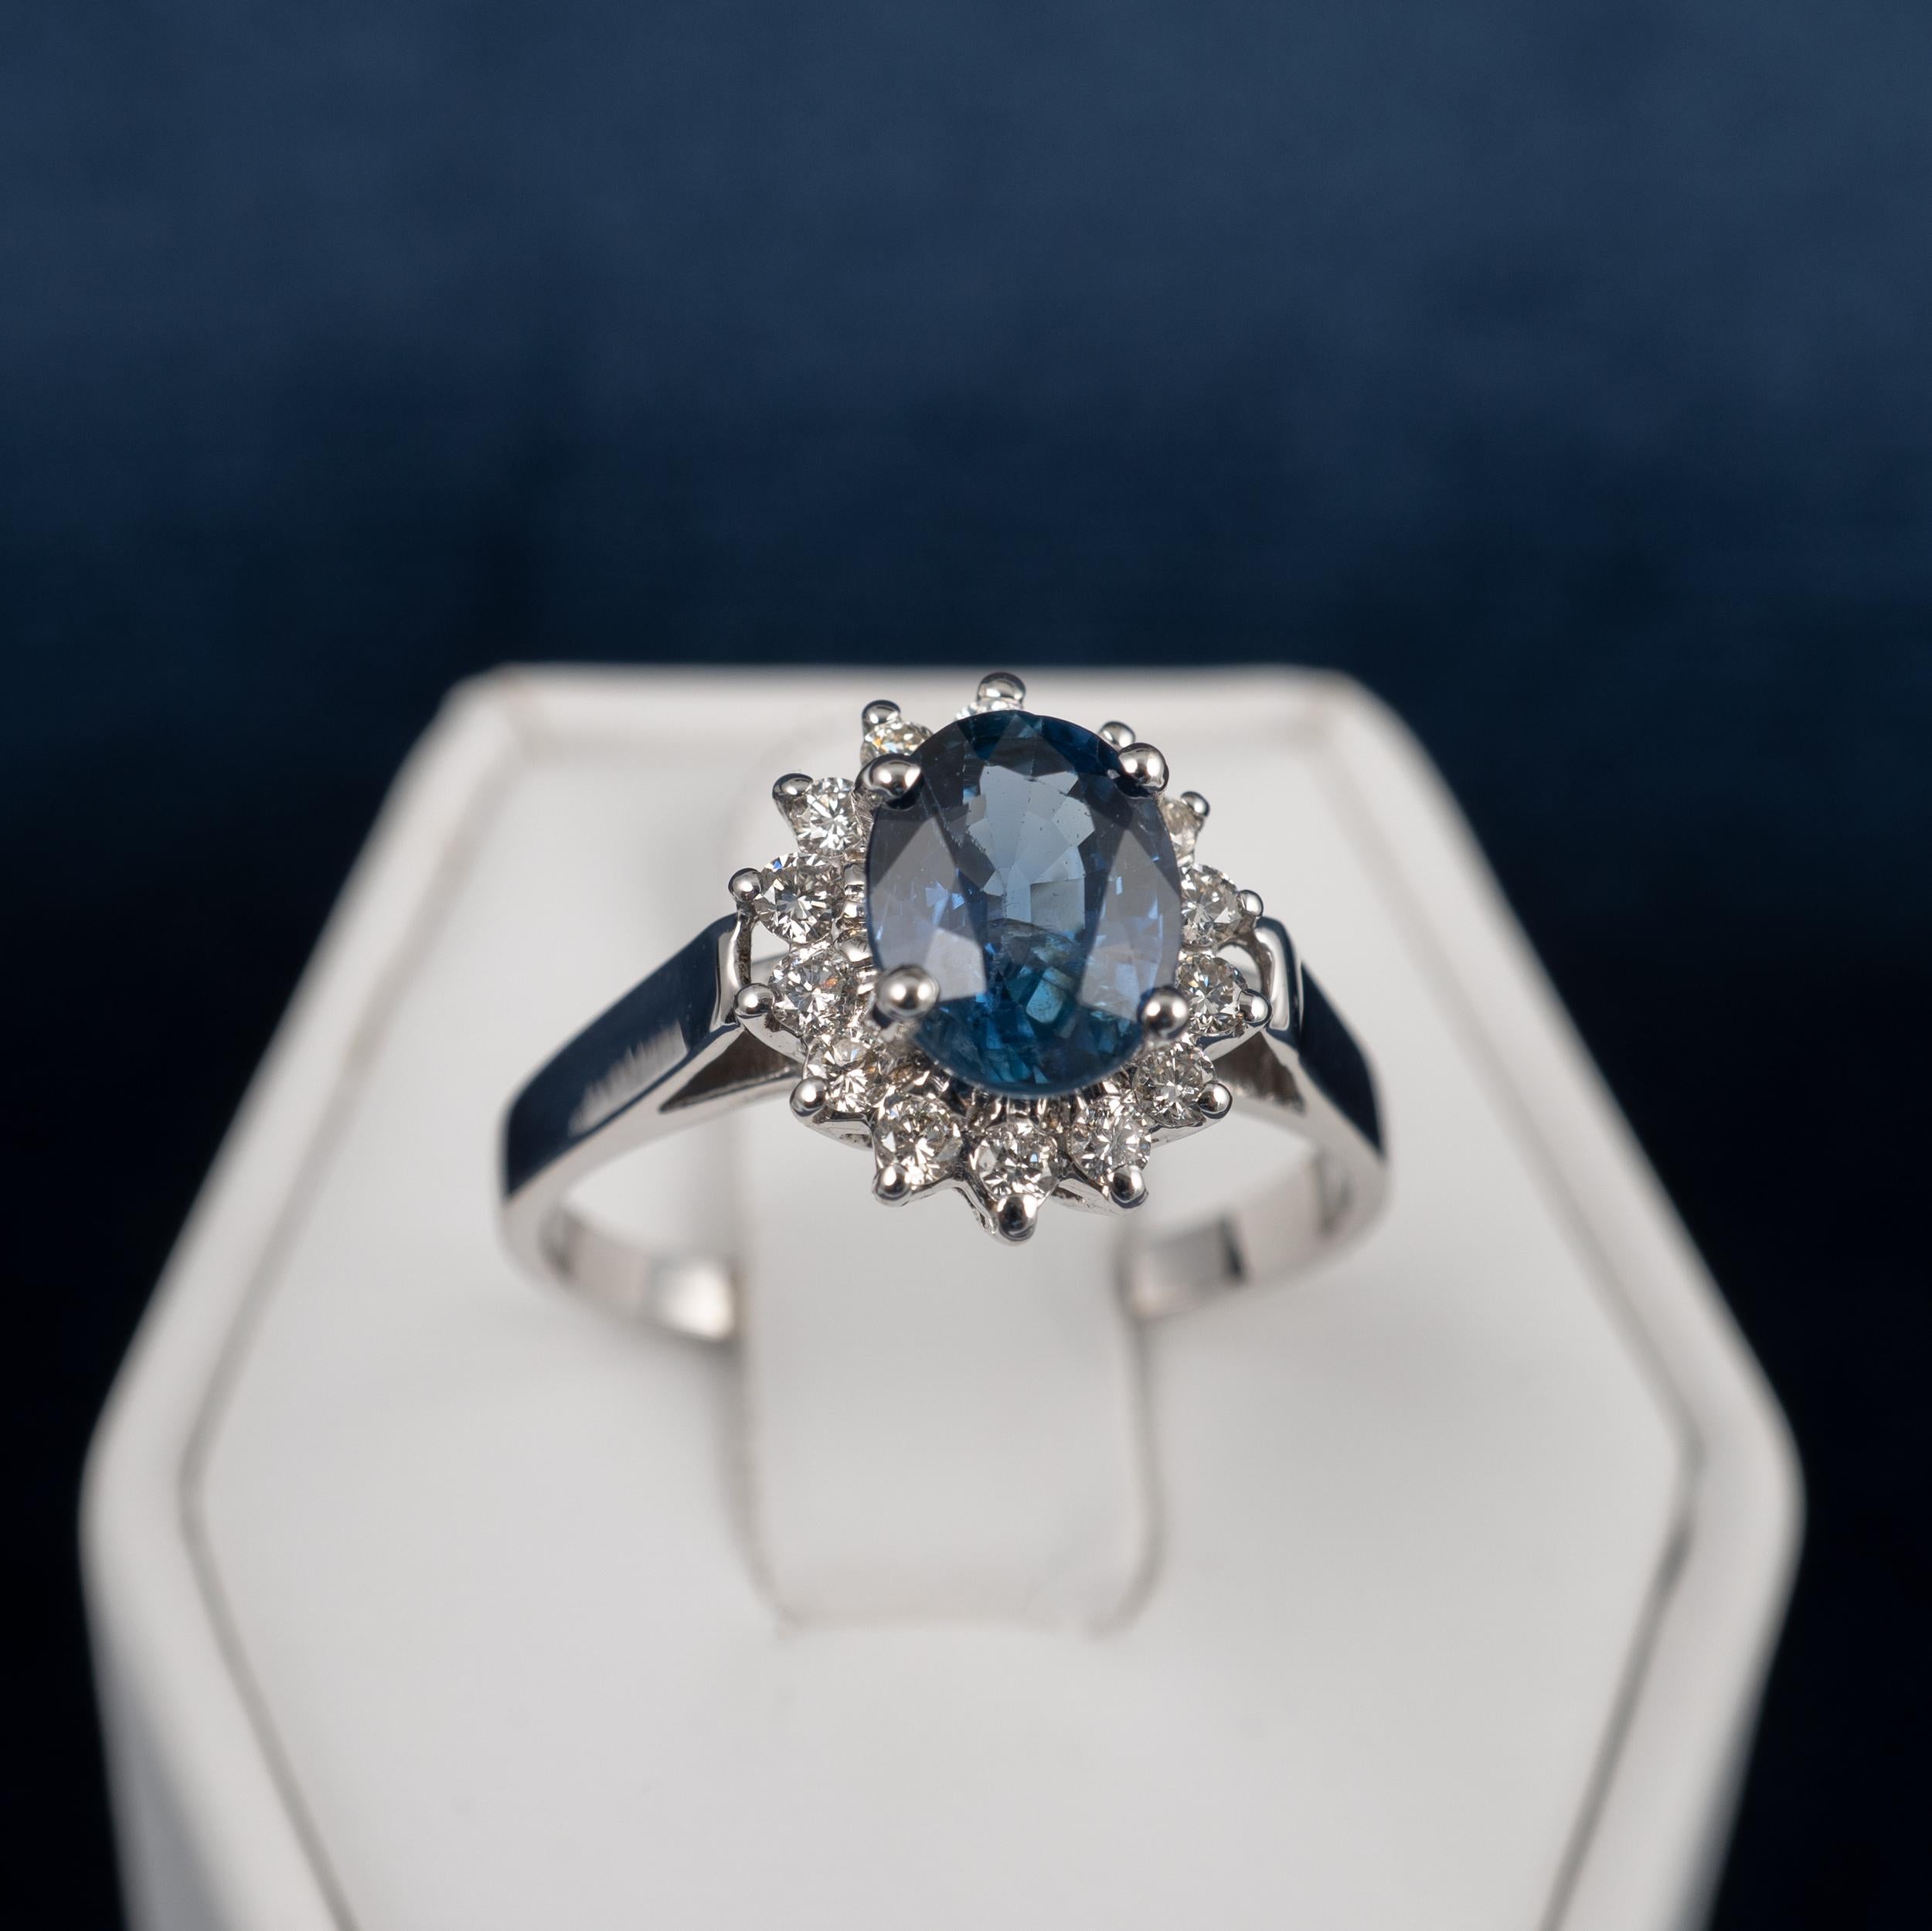 A fine quality sapphire diamond halo dress ring in 18 karat white gold.

This contemporary ring expertly crafted. It displays full British assay hallmarks and comes with gemstone certification and a neat leatherette gift ring box for the perfect